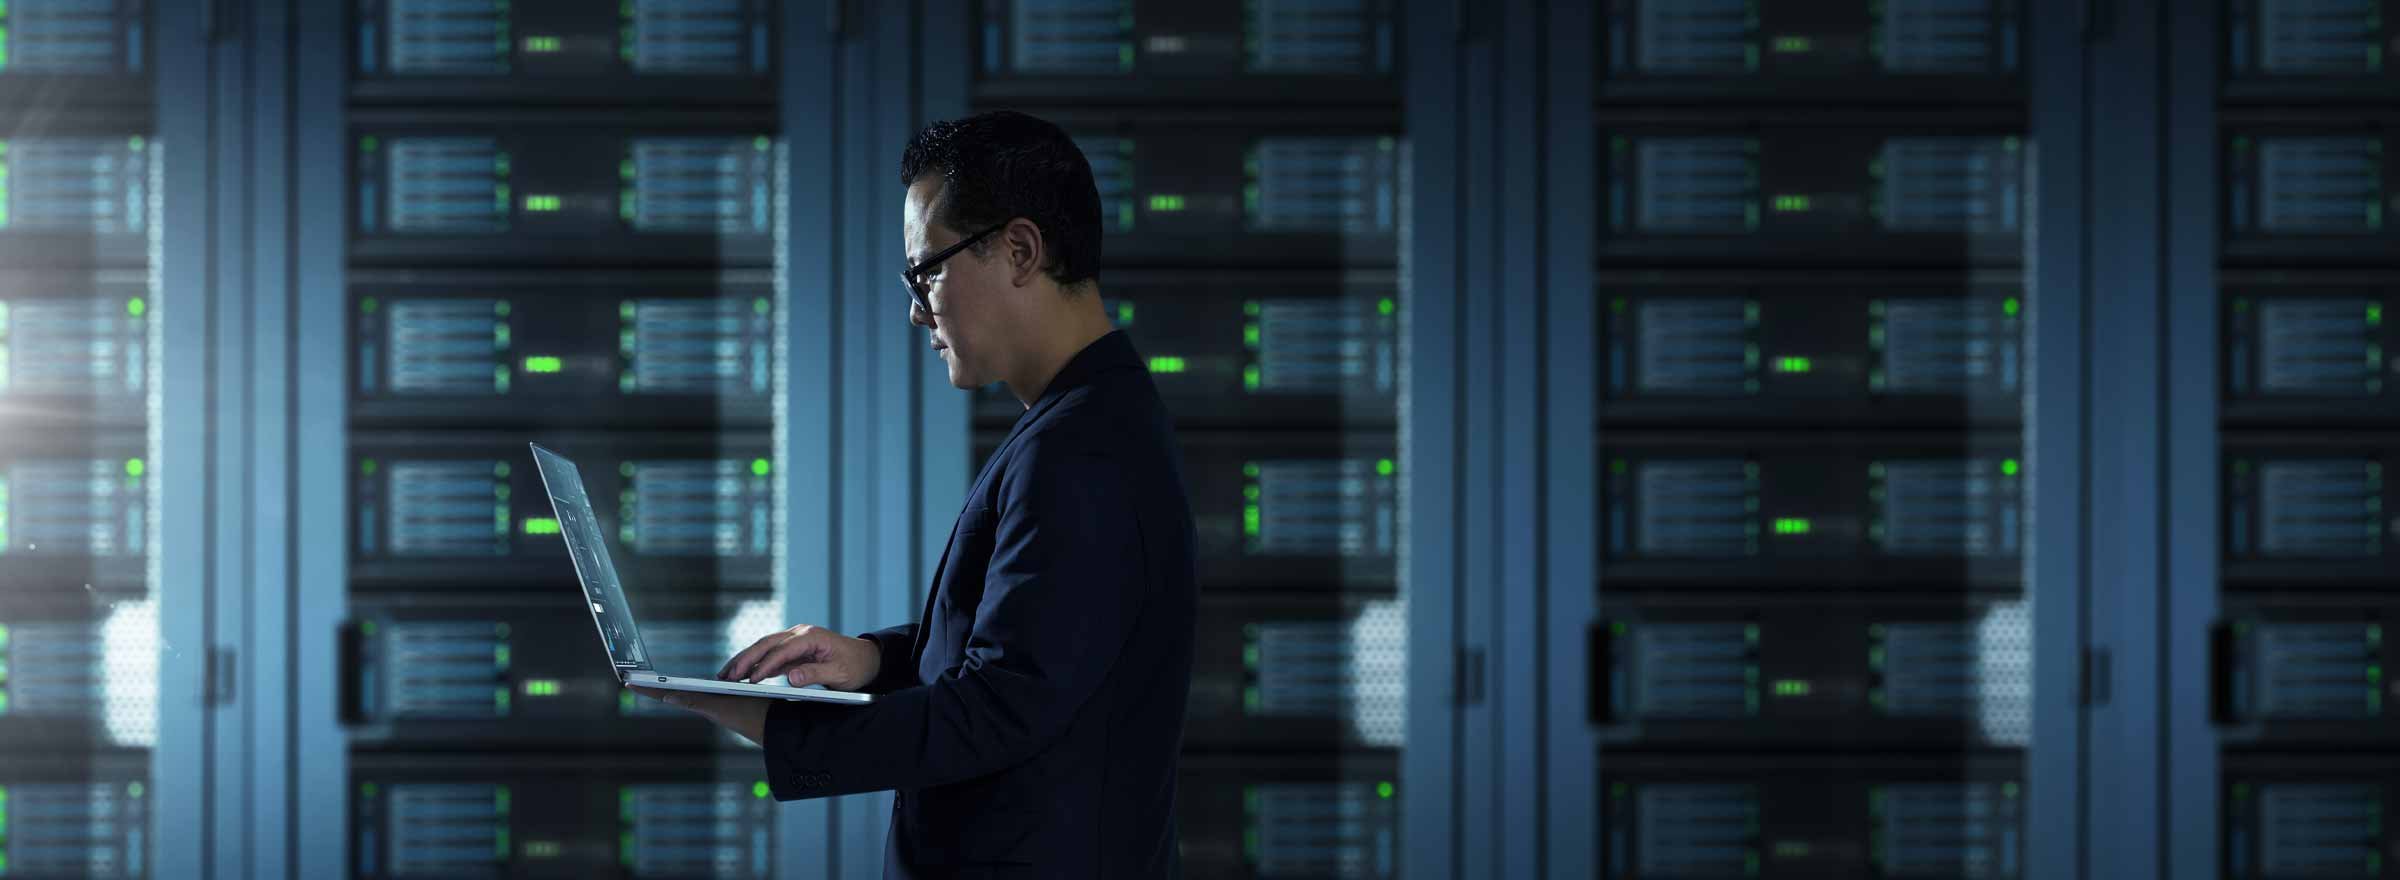 man standing in a datacenter and holding a laptop